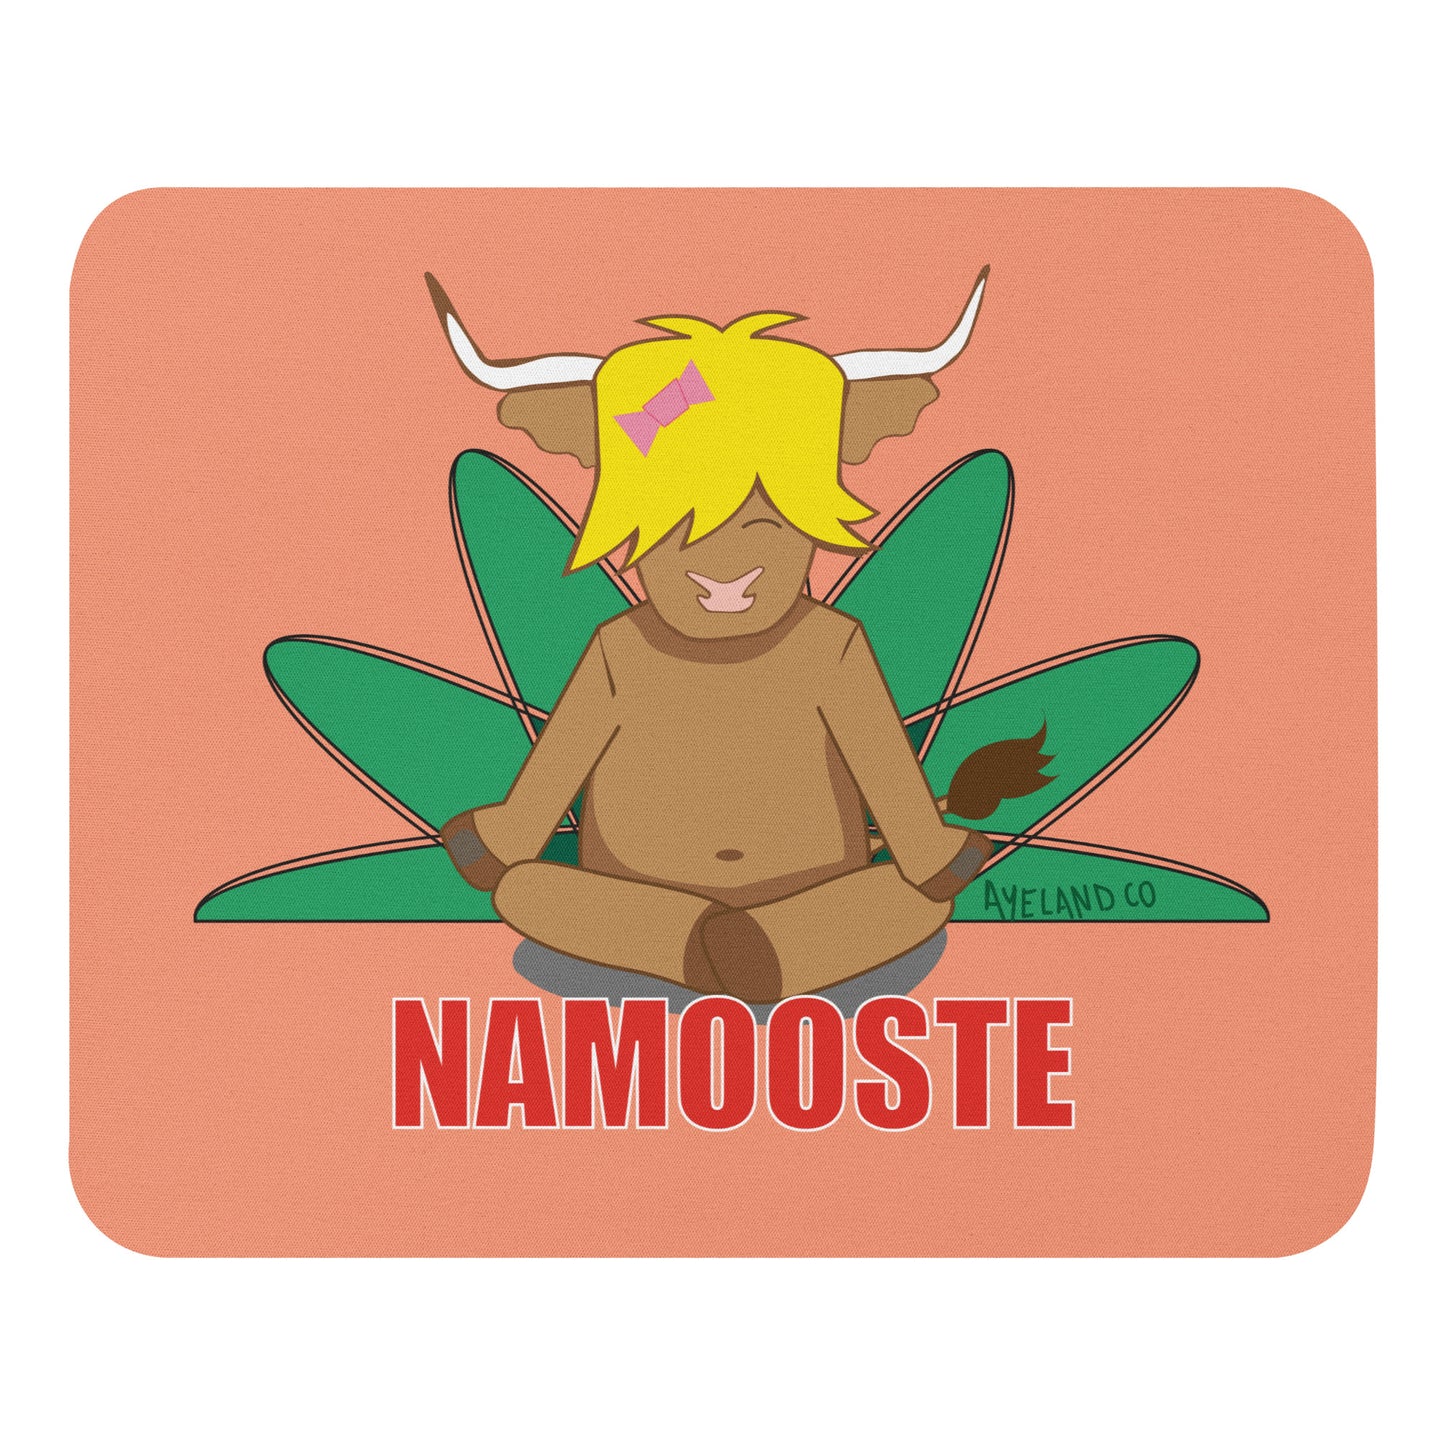 Cute namooste highland cow mouse pad